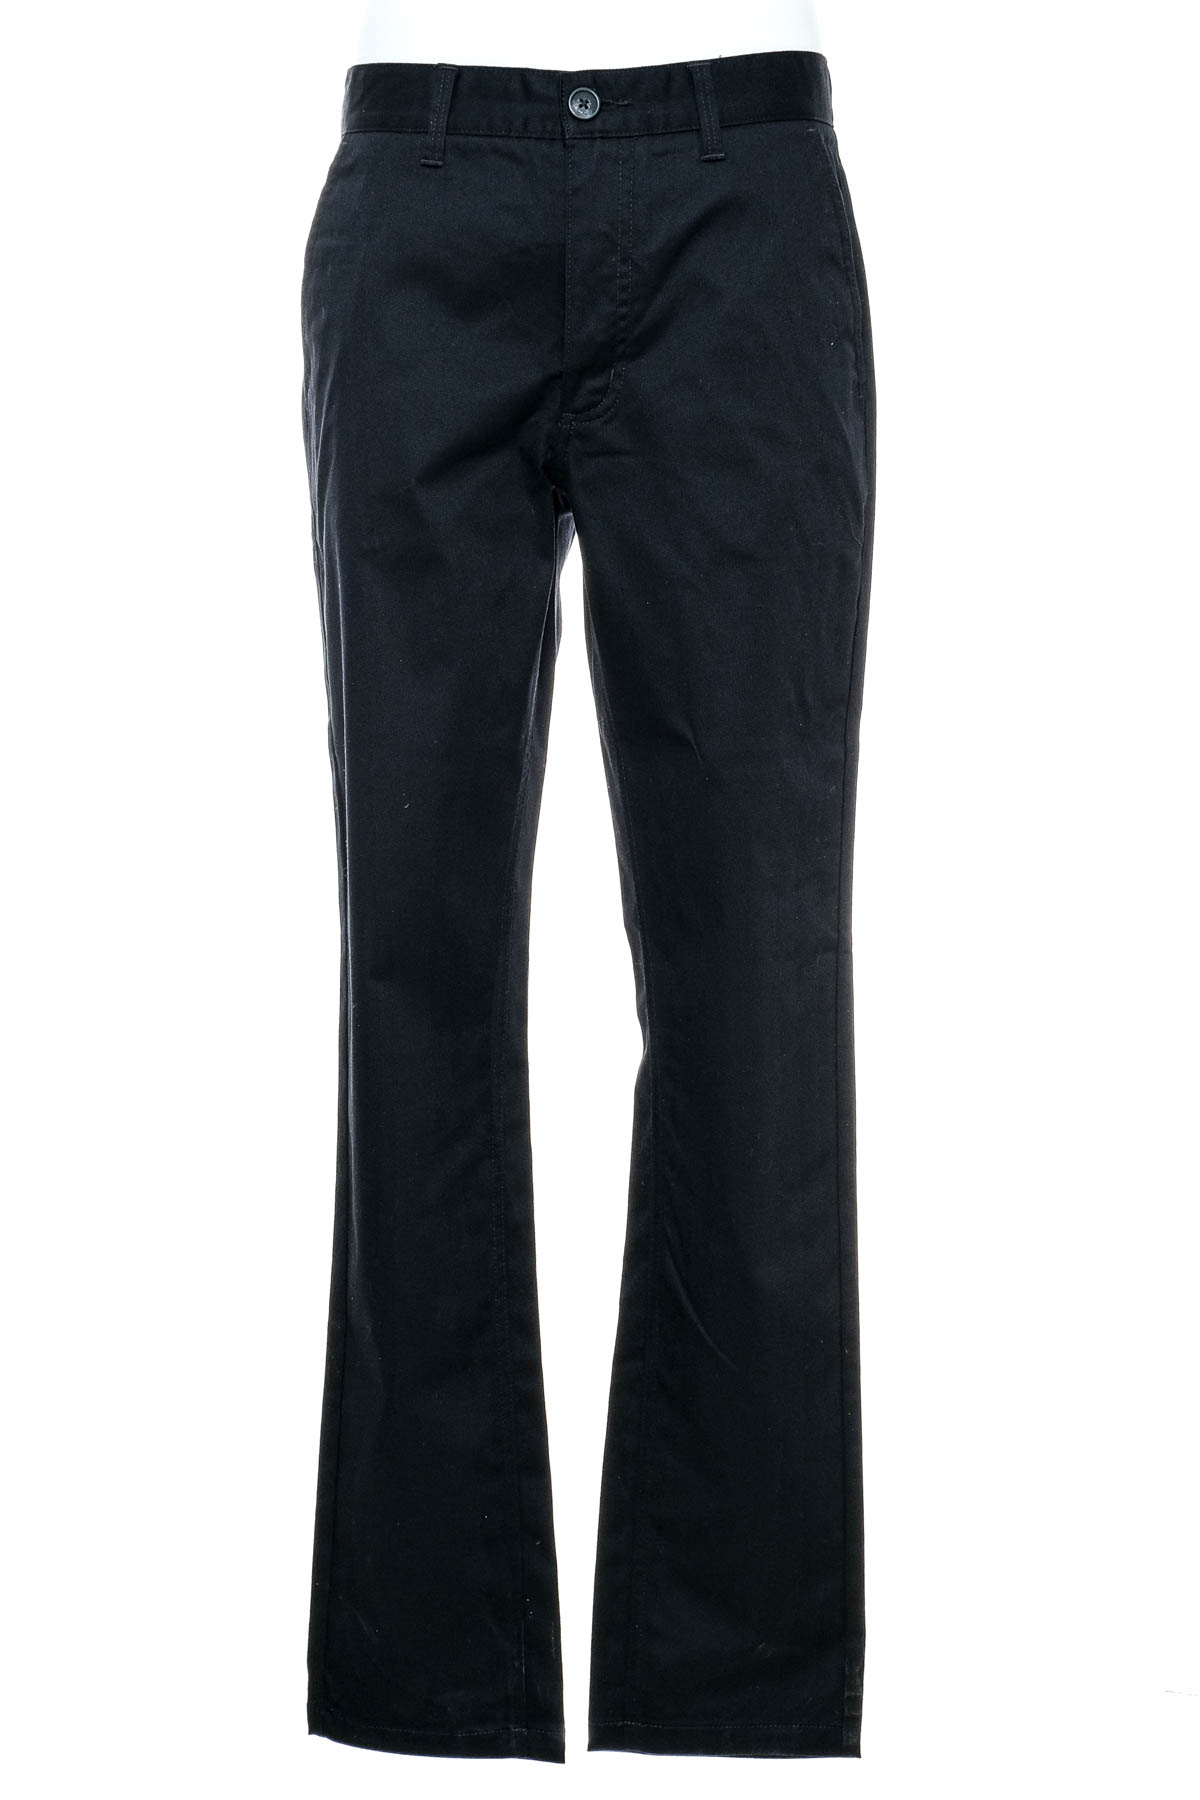 Men's trousers - Designs To You - 0